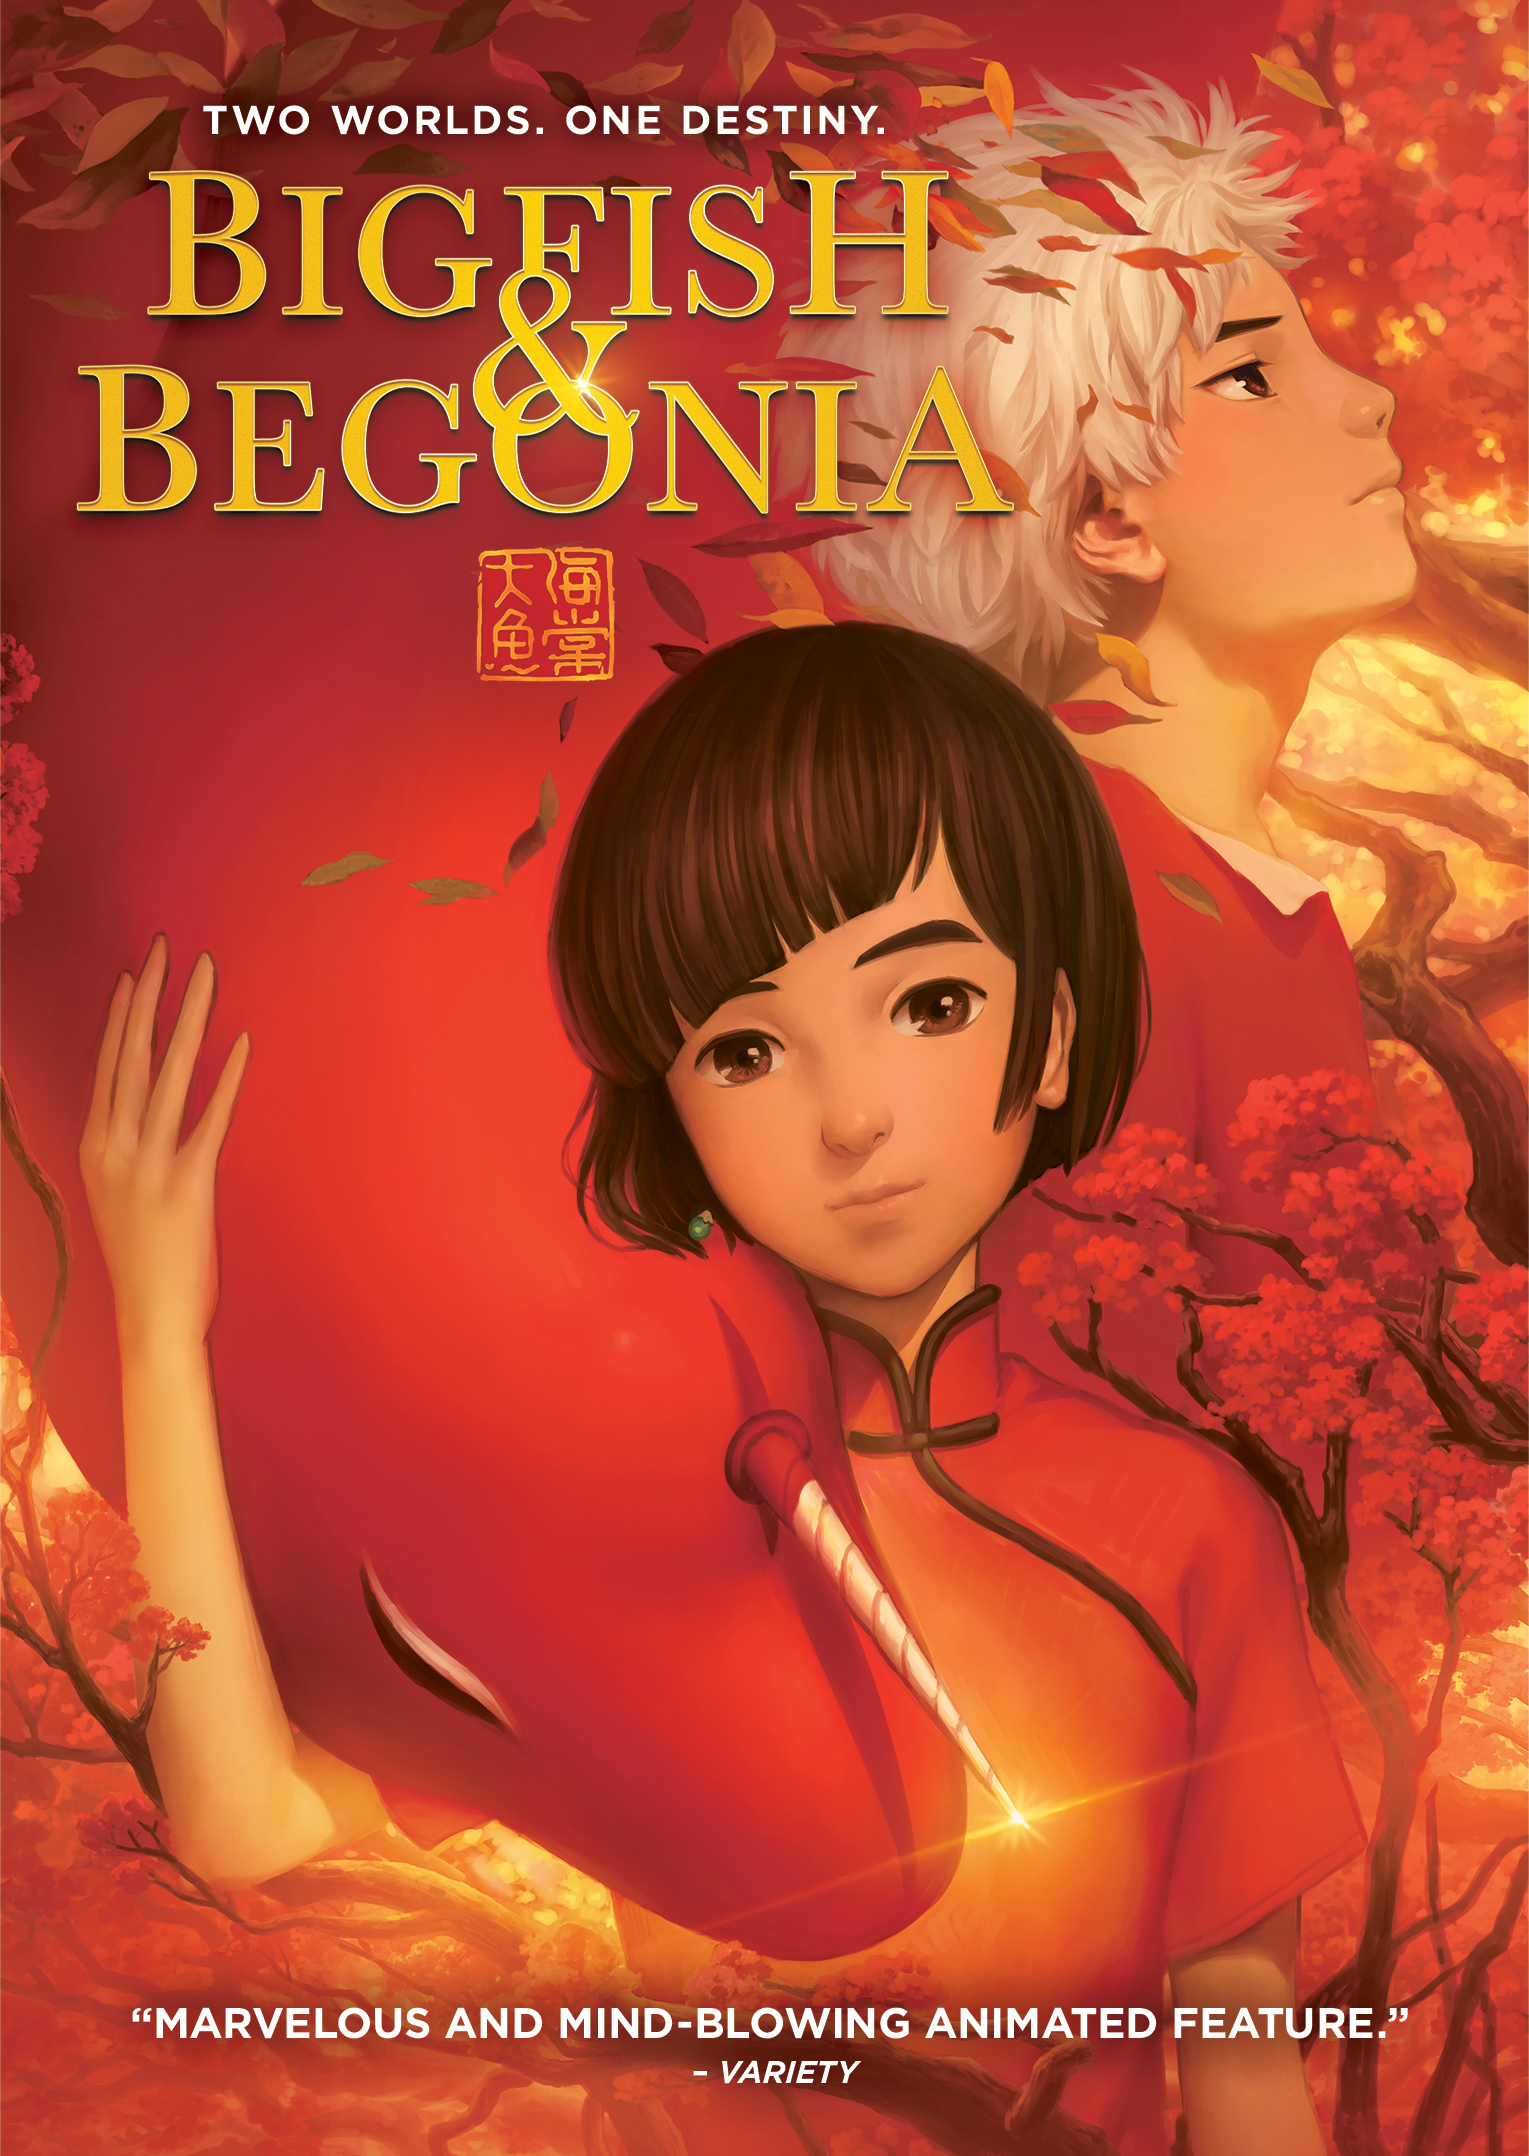 Big Fish & Begonia – An Emotional Masterpiece. Artistically Magical and Though Provoking